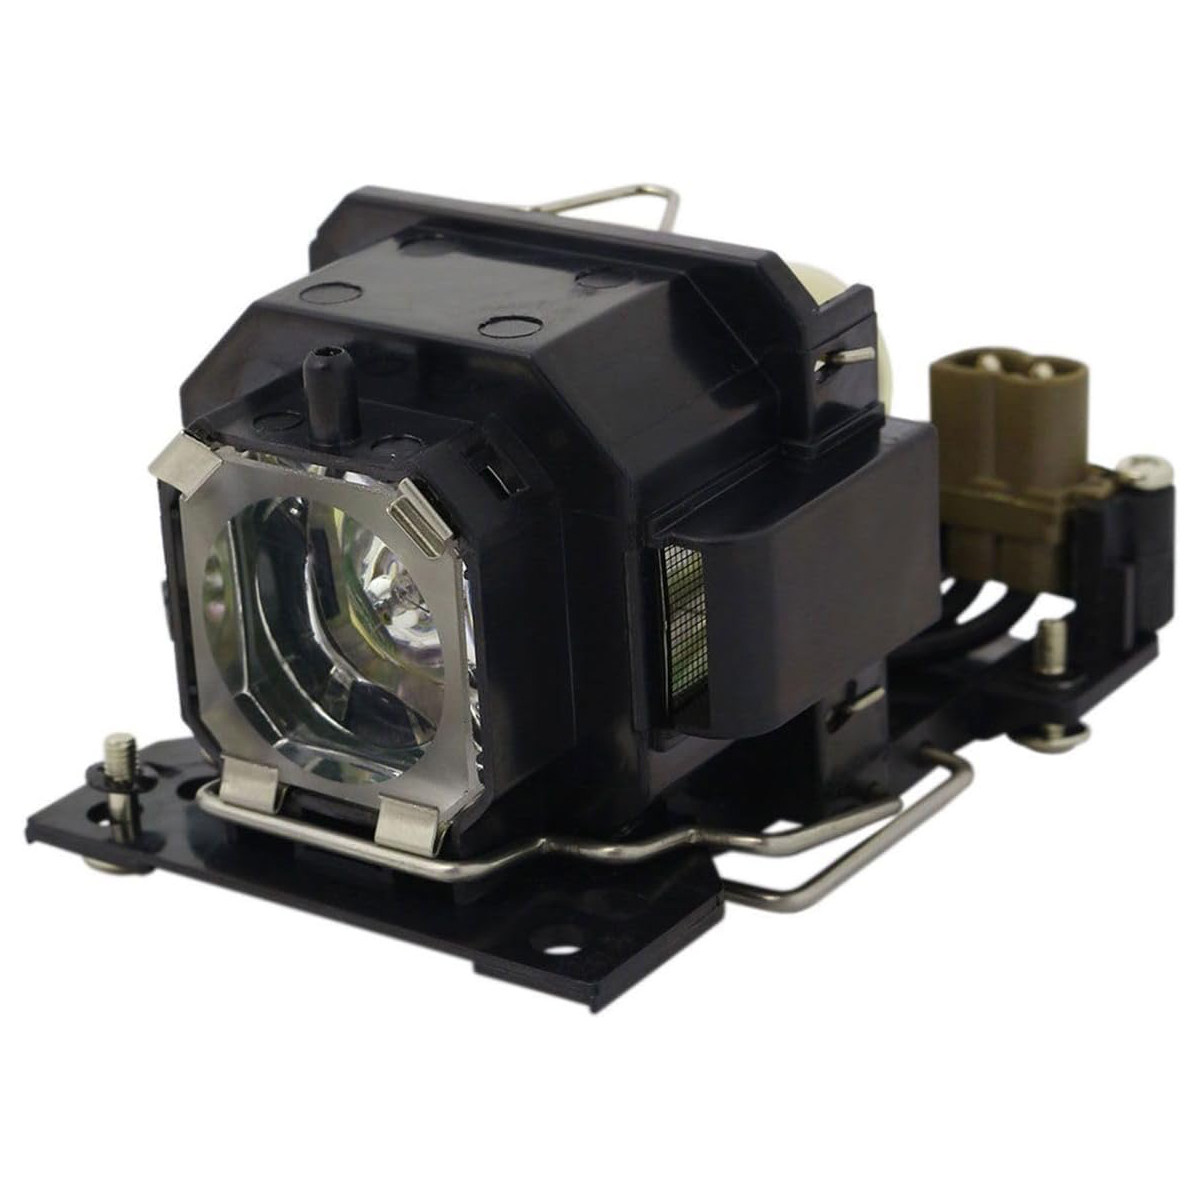 Replacement Projector lamp 78-6969-9903-2 For 3M X20